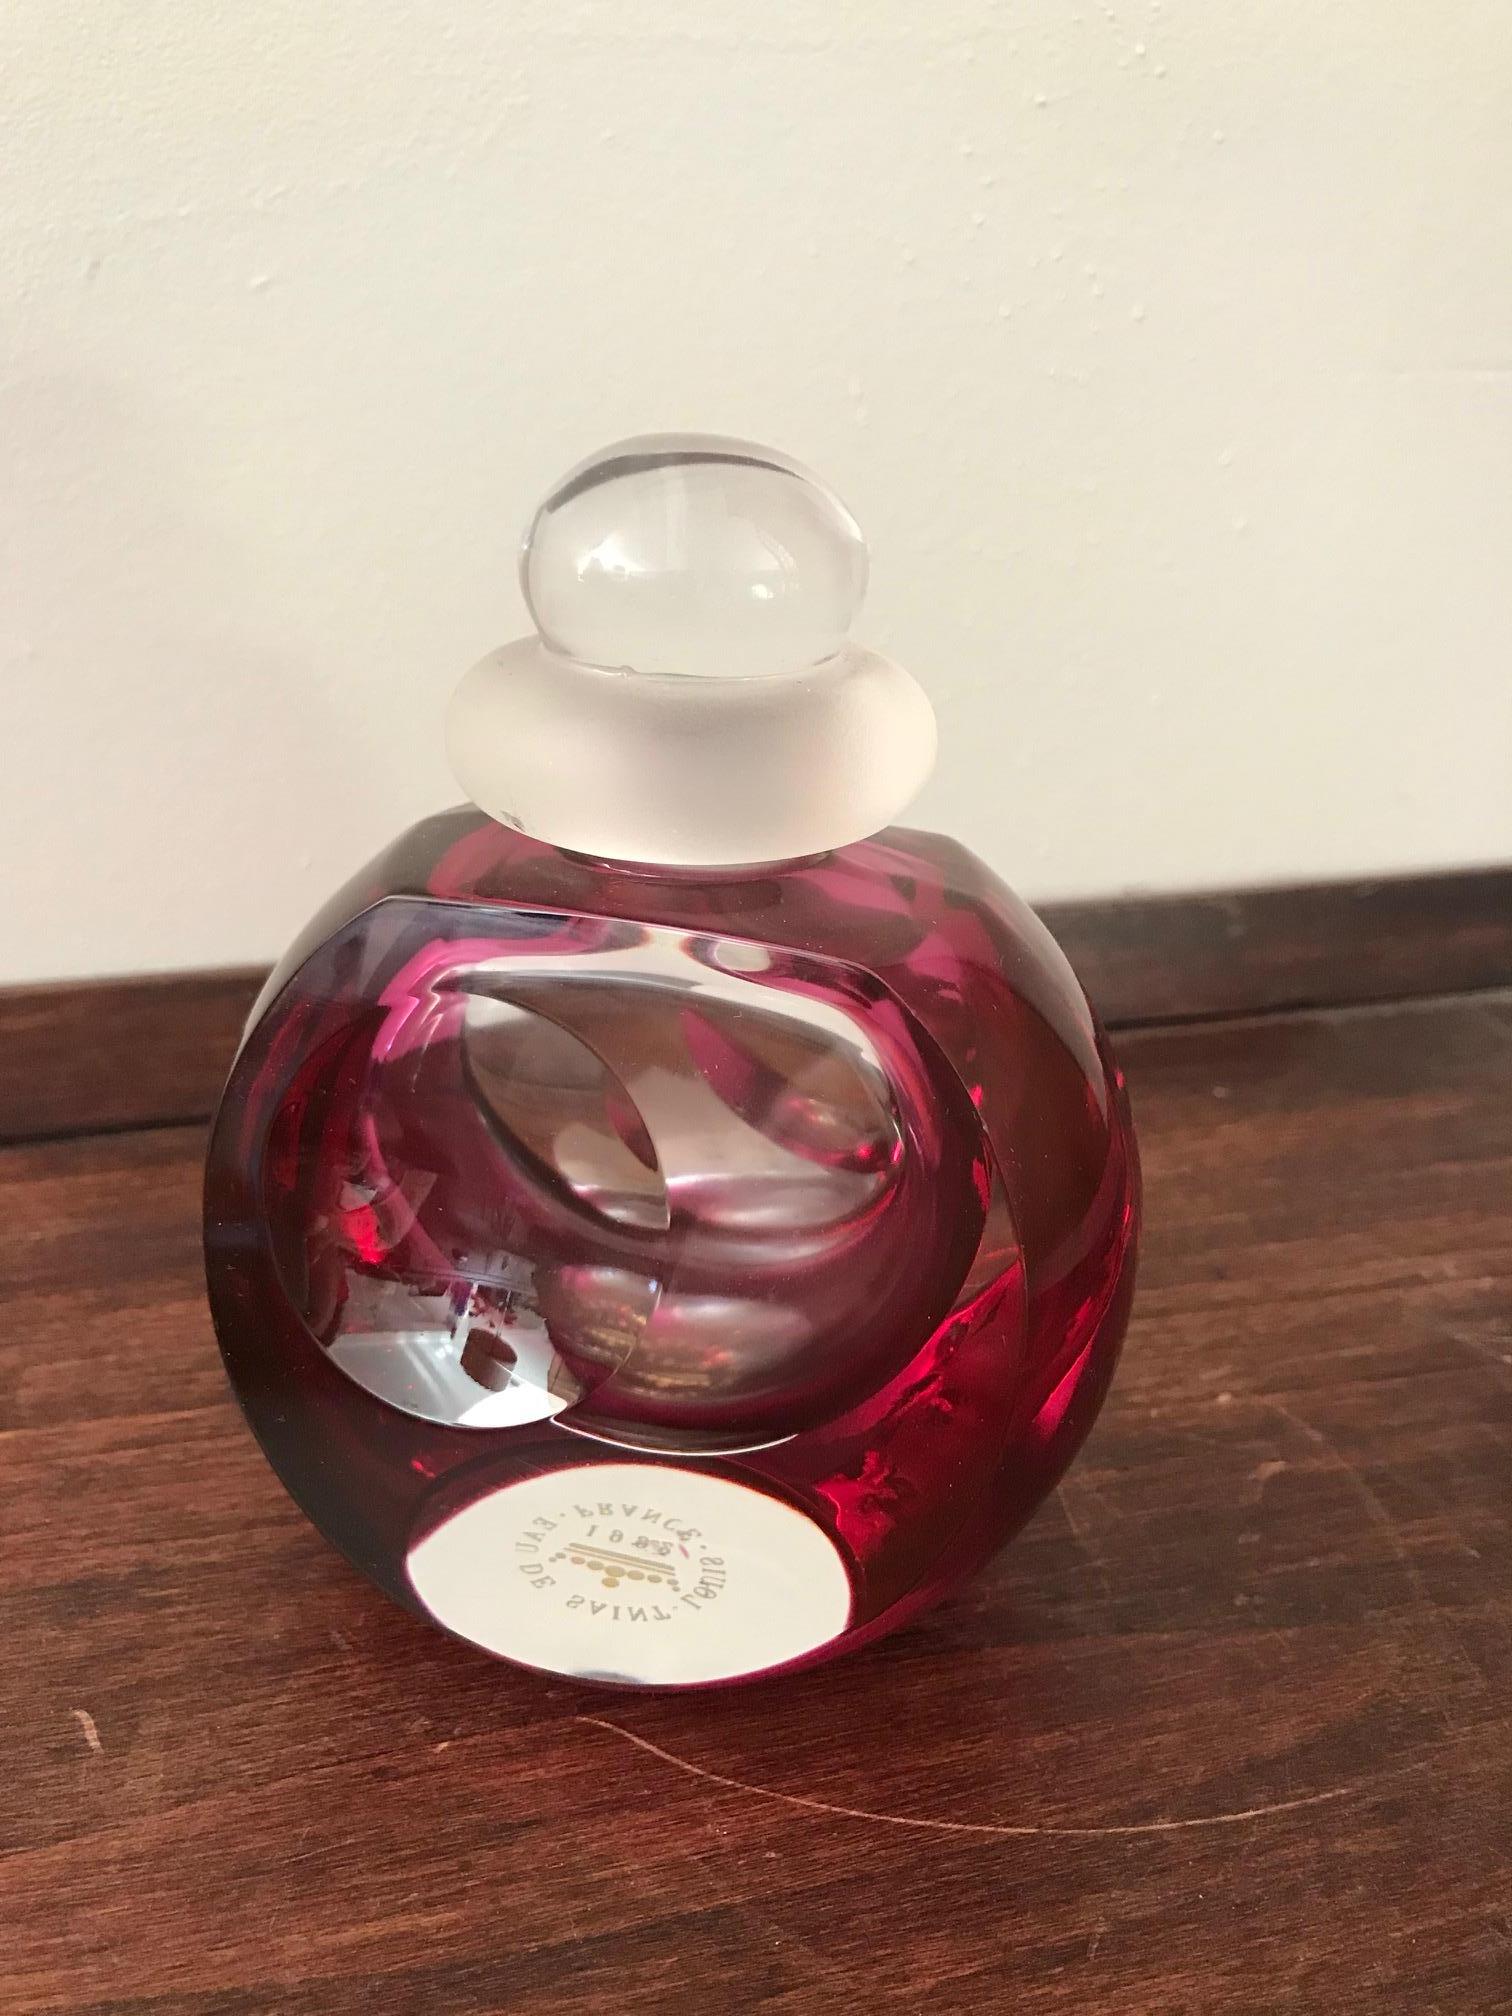 Very nice 20th century French red glass perfume bottle from the 1940s. 
The plug is removable. The St Louis stamp is written on the base. 
Very high quality.